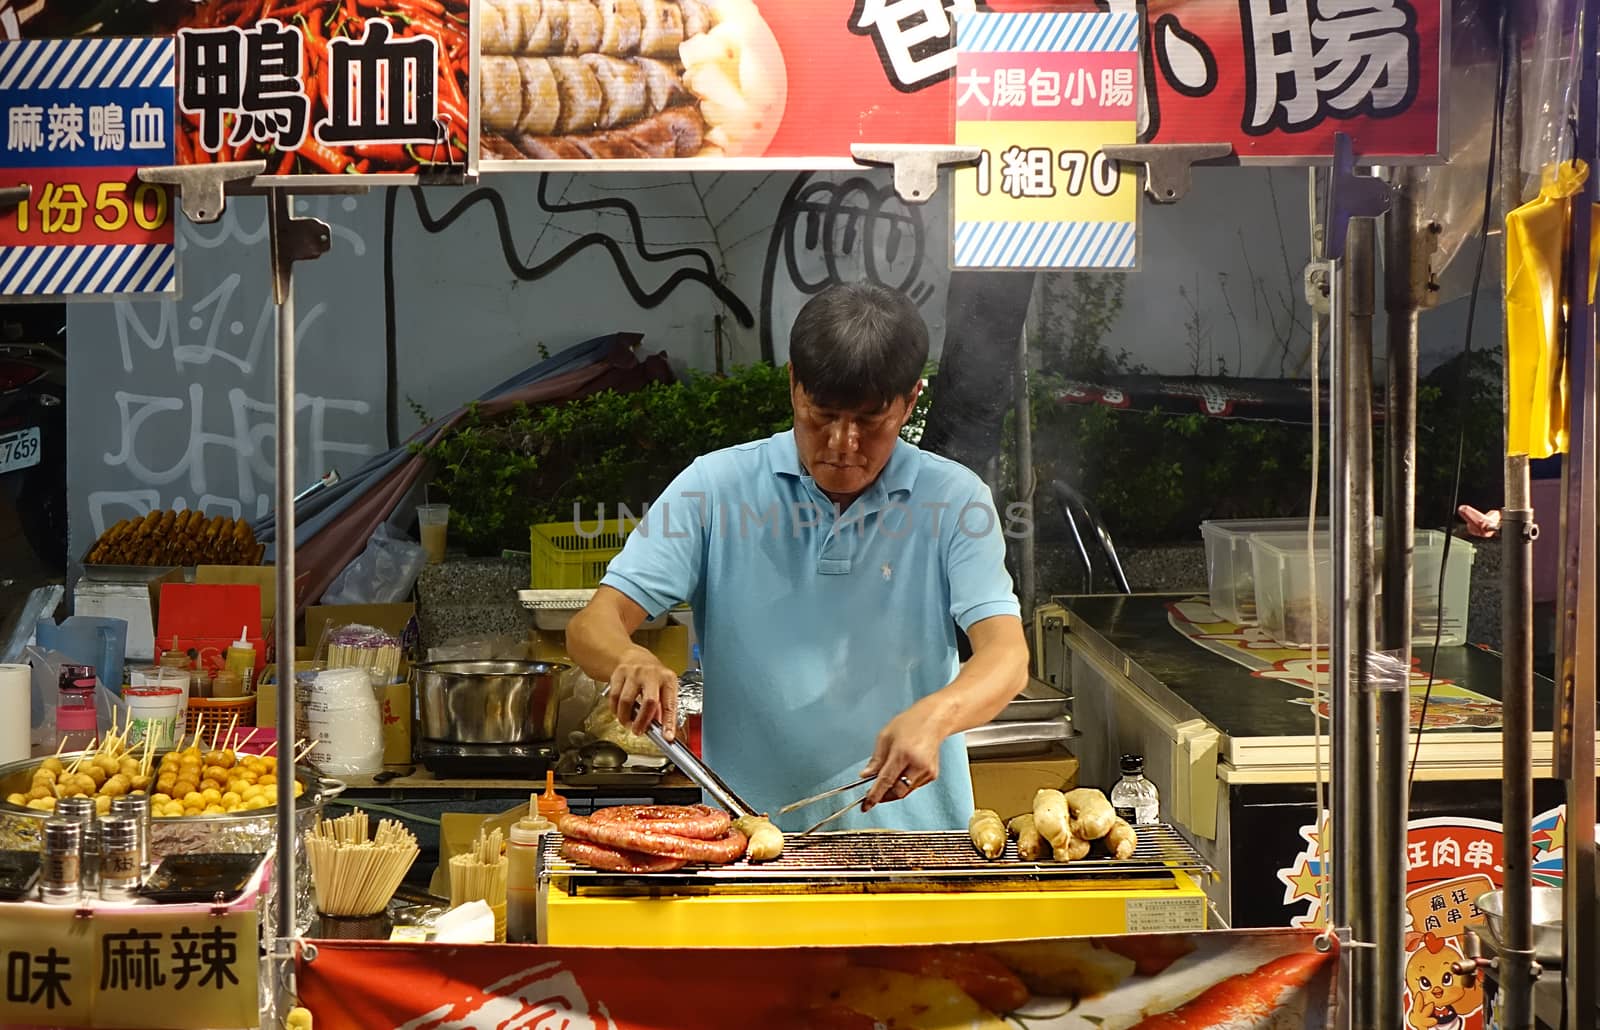 Outdoor Vendor Grills Sausages by shiyali